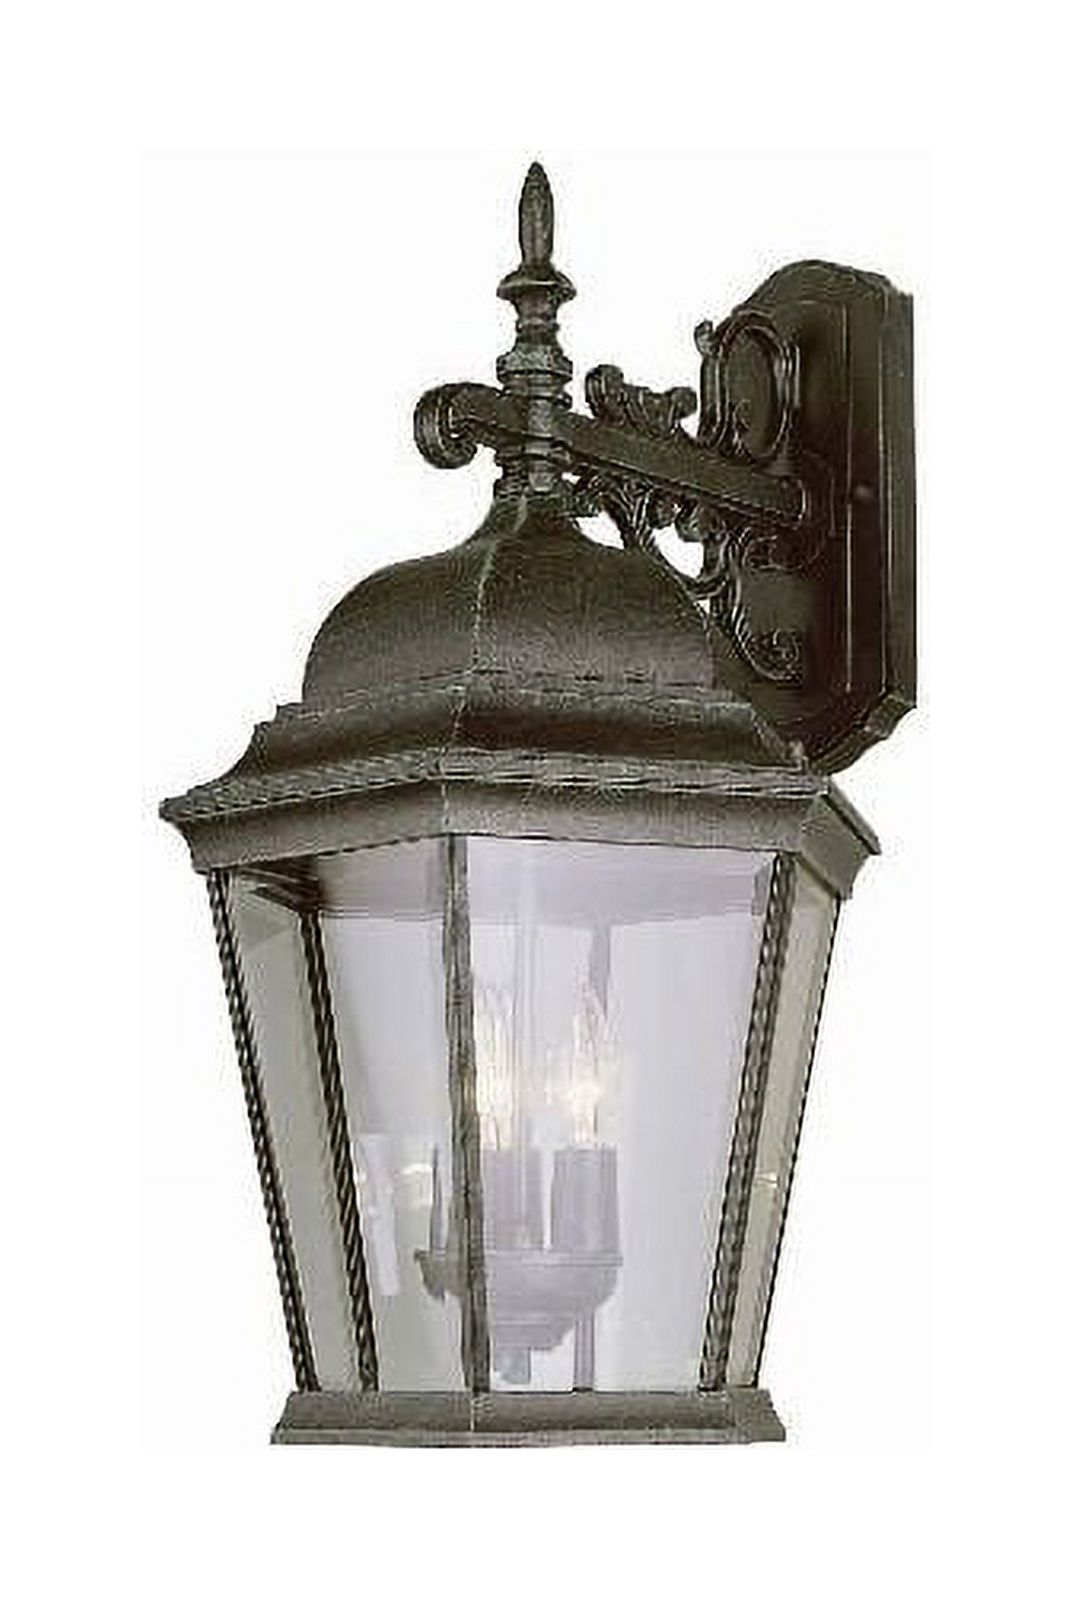 Trans Globe Lighting 51002 Three Light Up Lighting Outdoor Wall Sconce from the Outdoor Collection - image 1 of 2